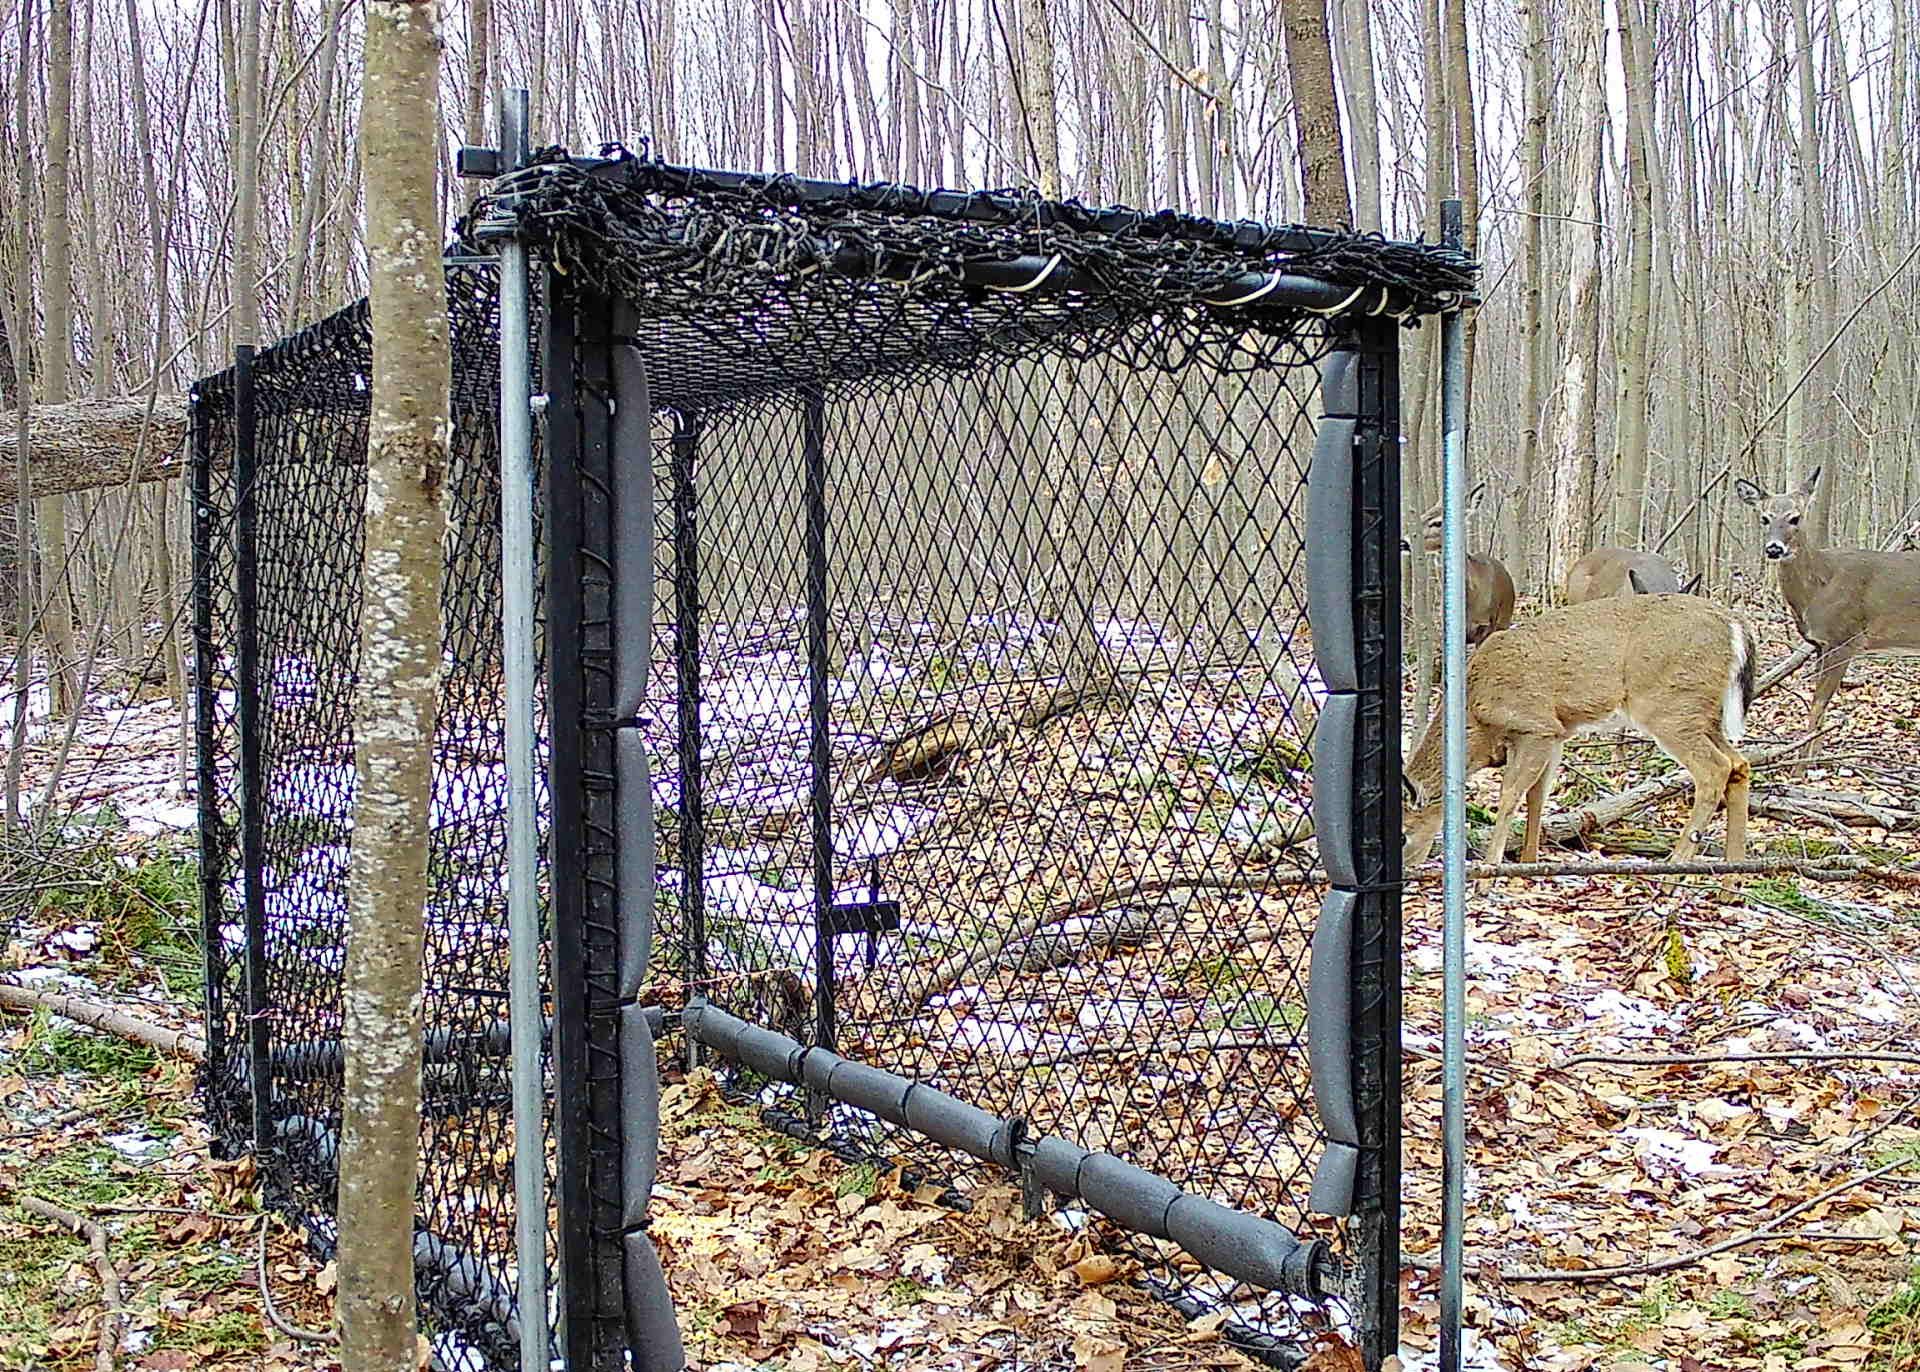 Clover trap with 4 deer standing behind it